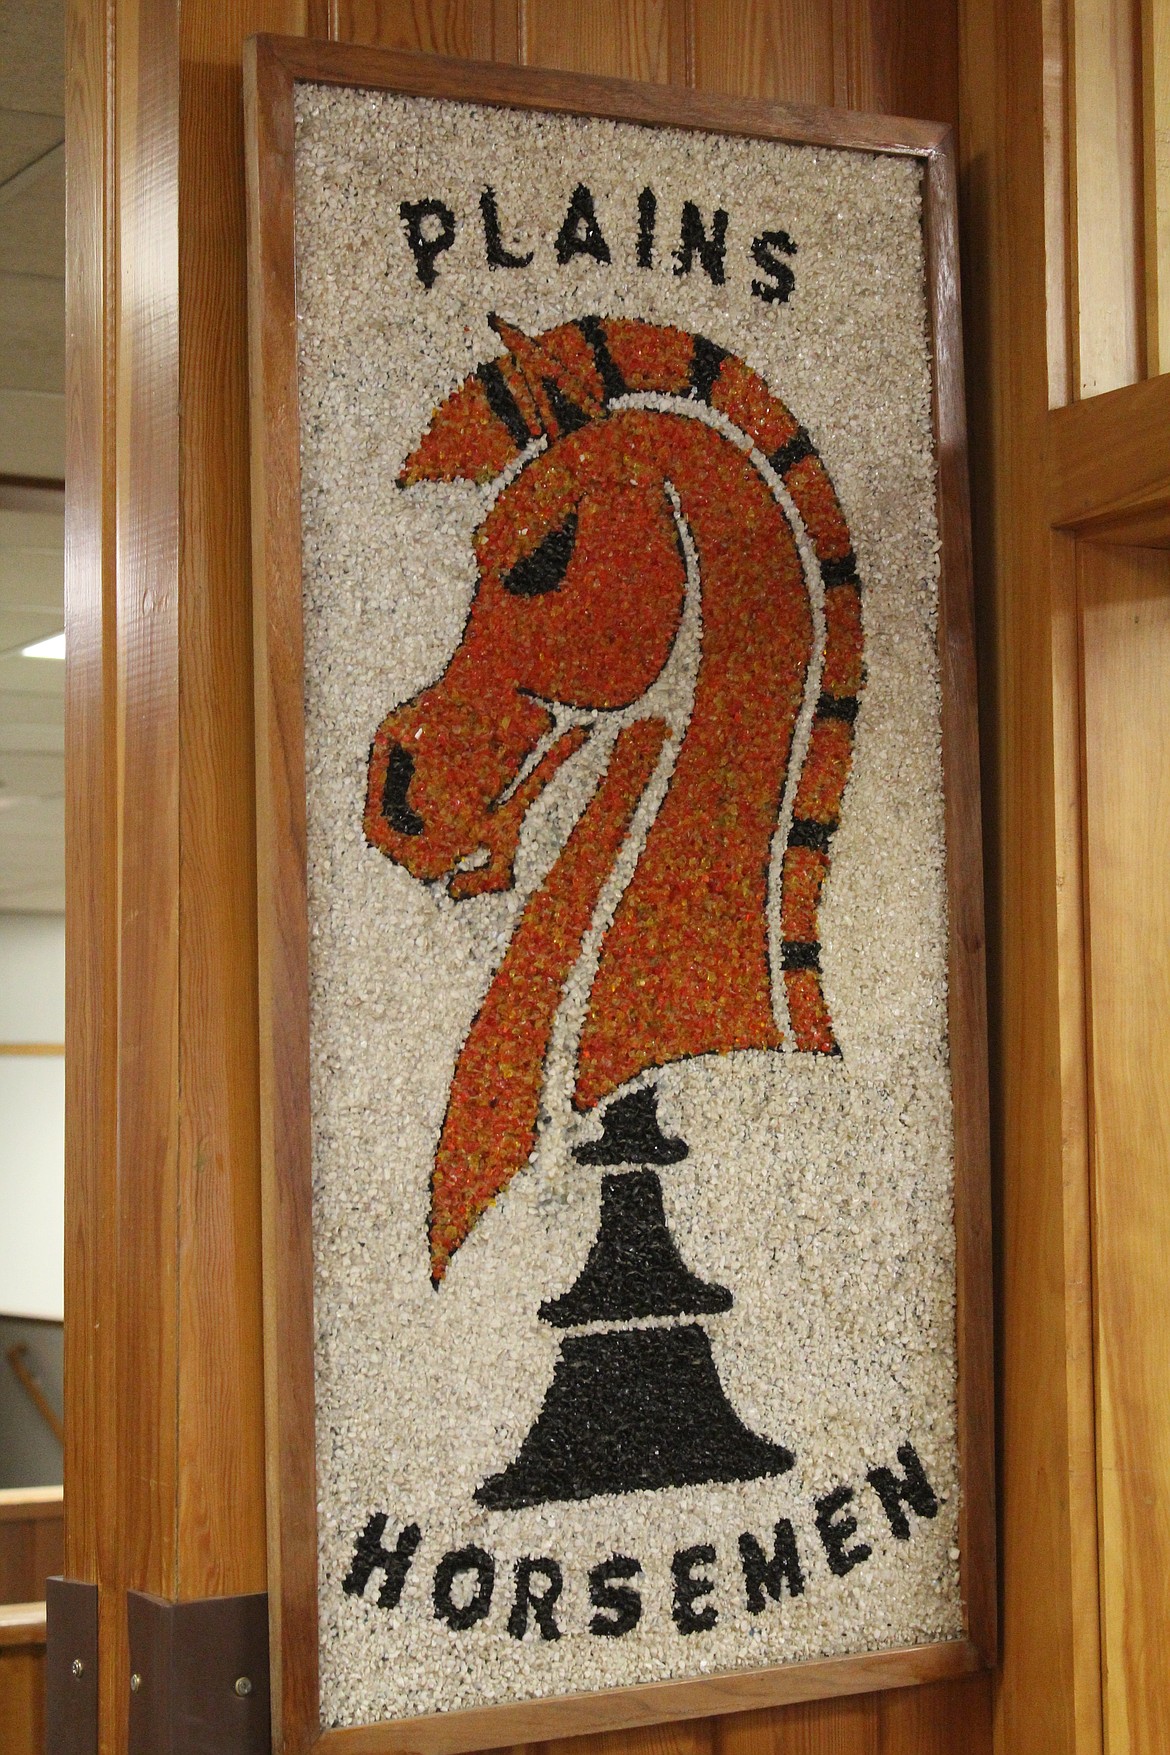 THE PALADIN symbol for Plains Schools, displayed in the main entryway to the school. (John Dowd/Clark Fork Valley Press)